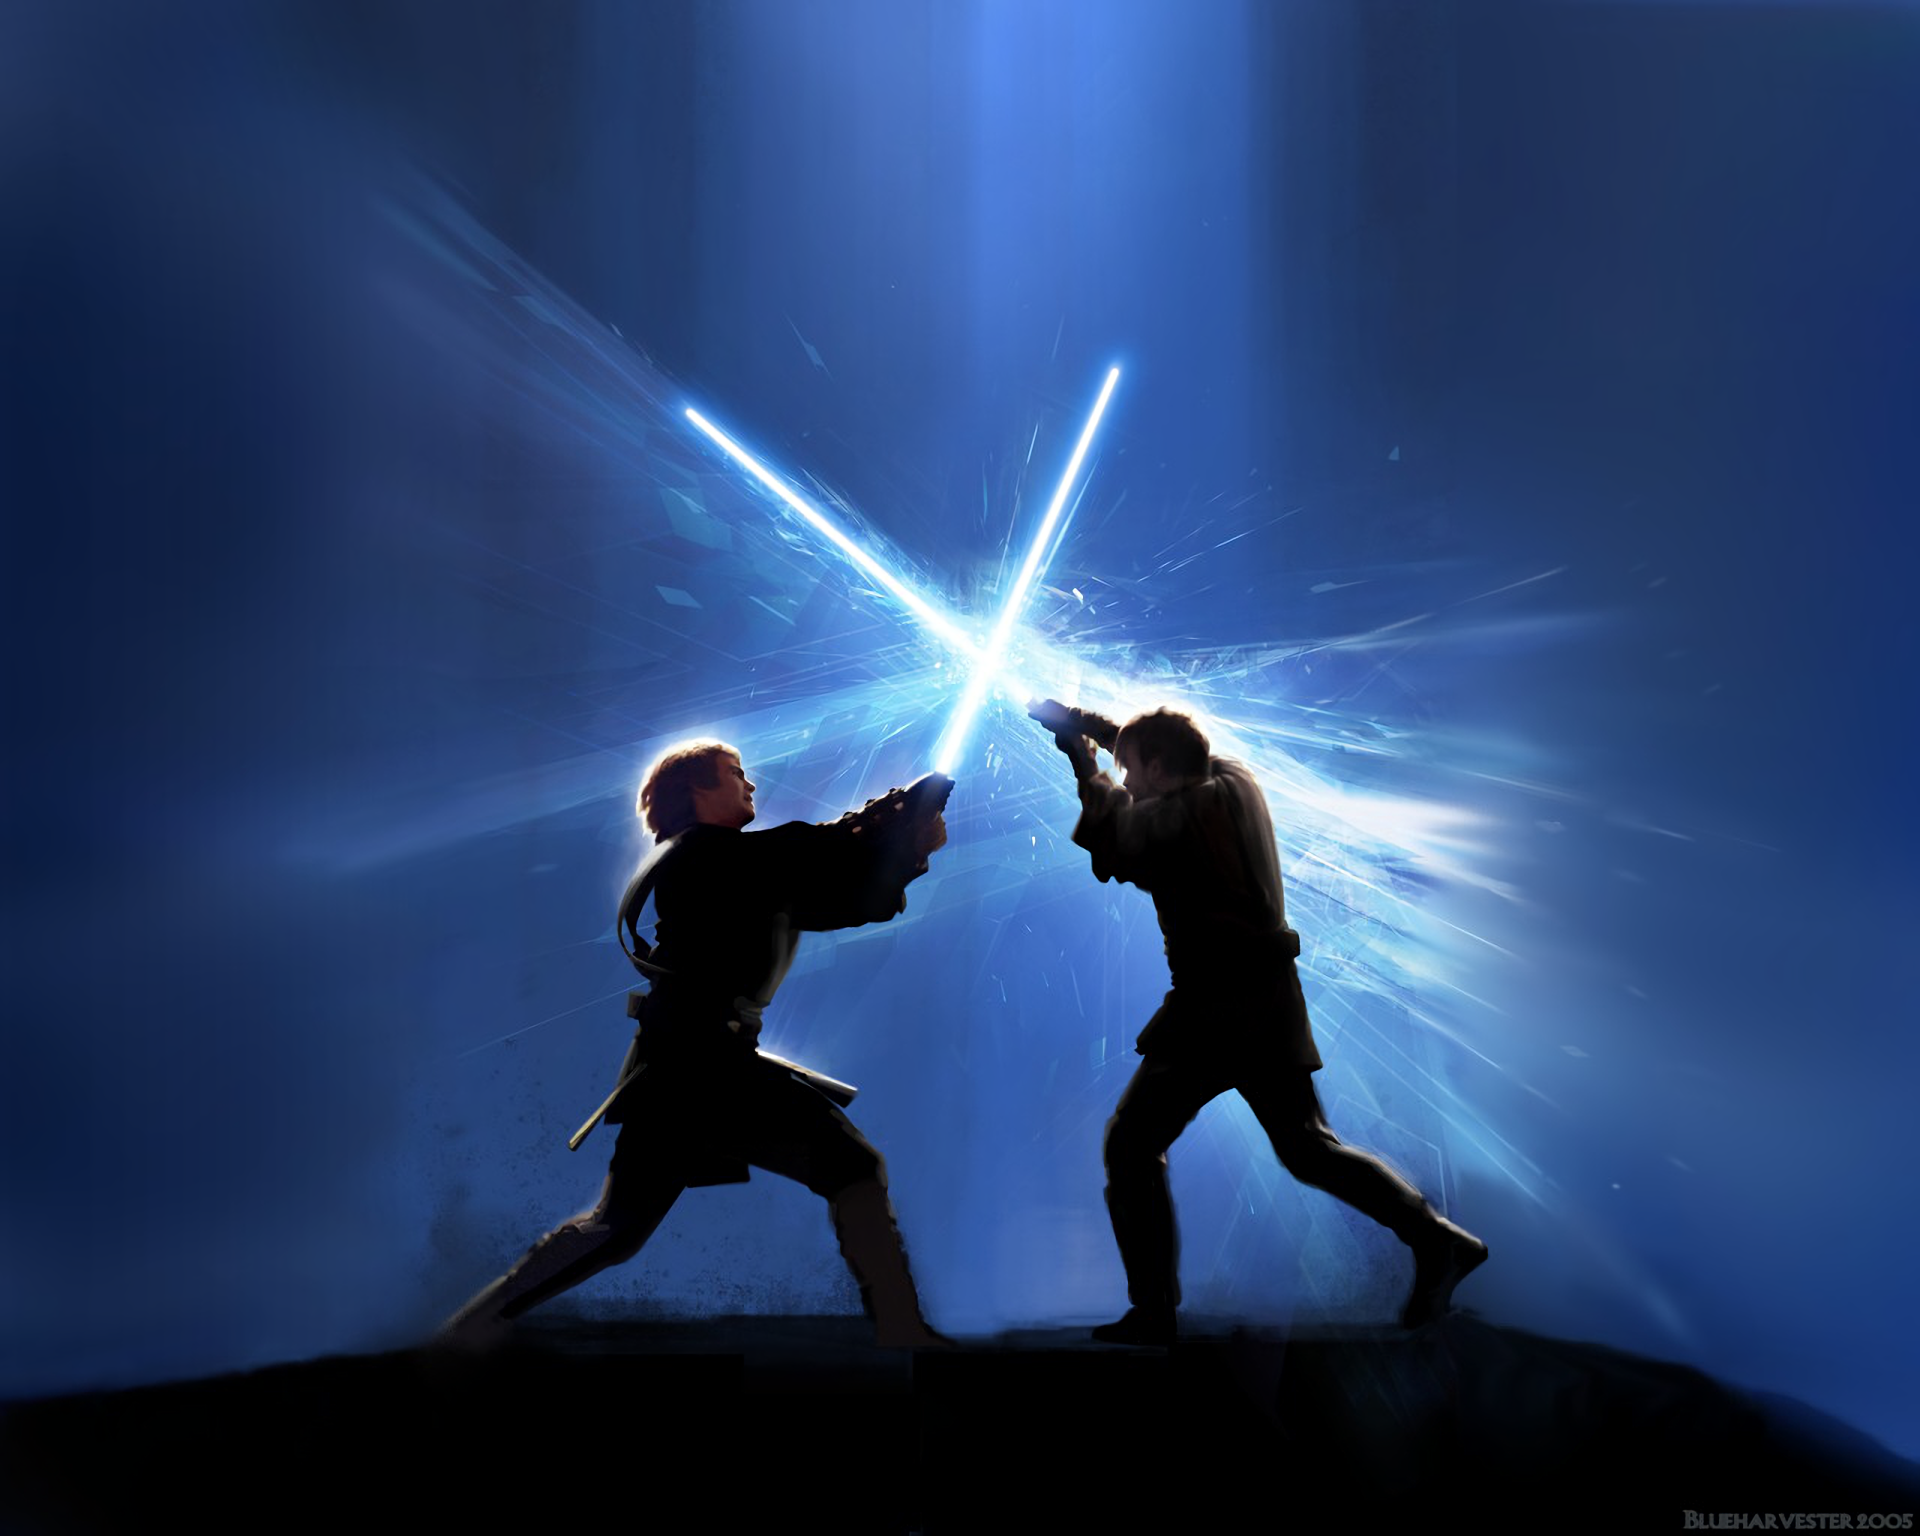 Obi-Wan and Anakin duel with blue lightsabers in a legendary clash of old friends.